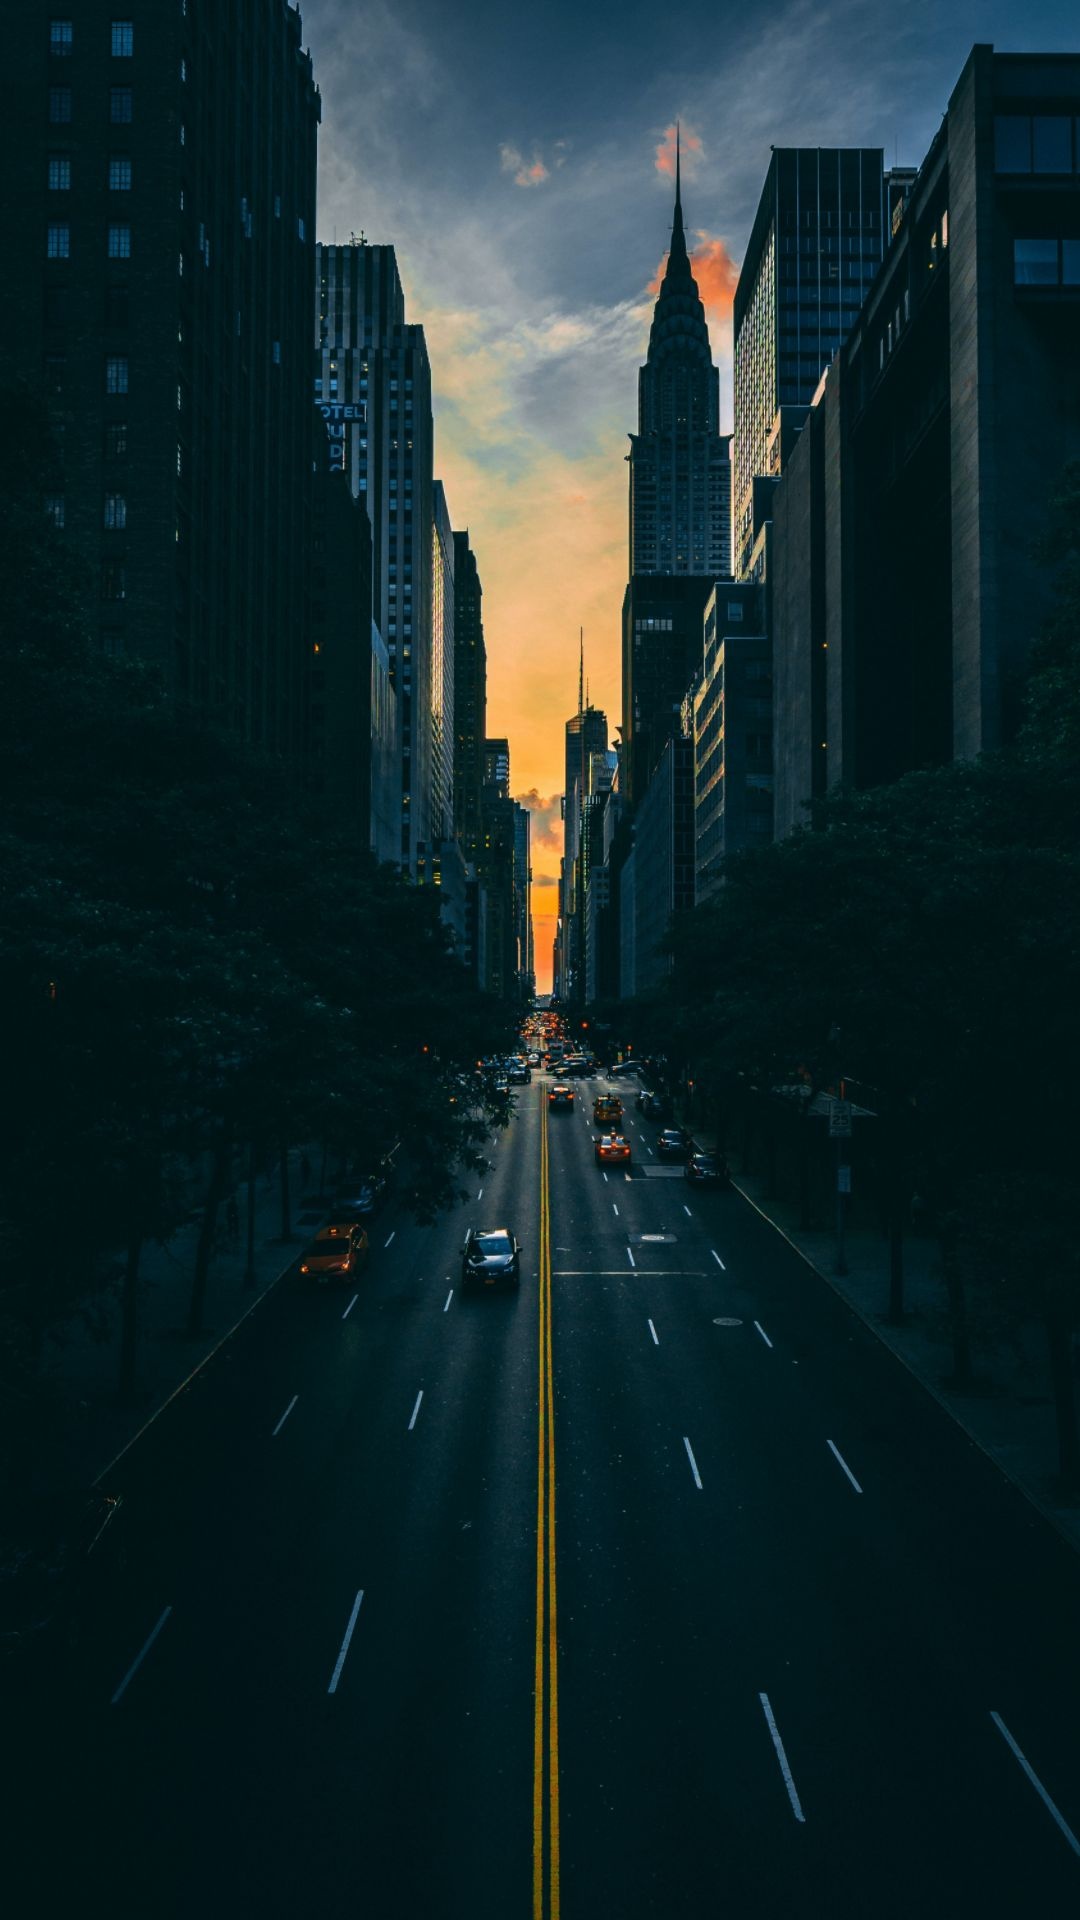 City: Middle Manhattan during the sunrise, Amazing view of the Empire State Building, New York. 1080x1920 Full HD Wallpaper.